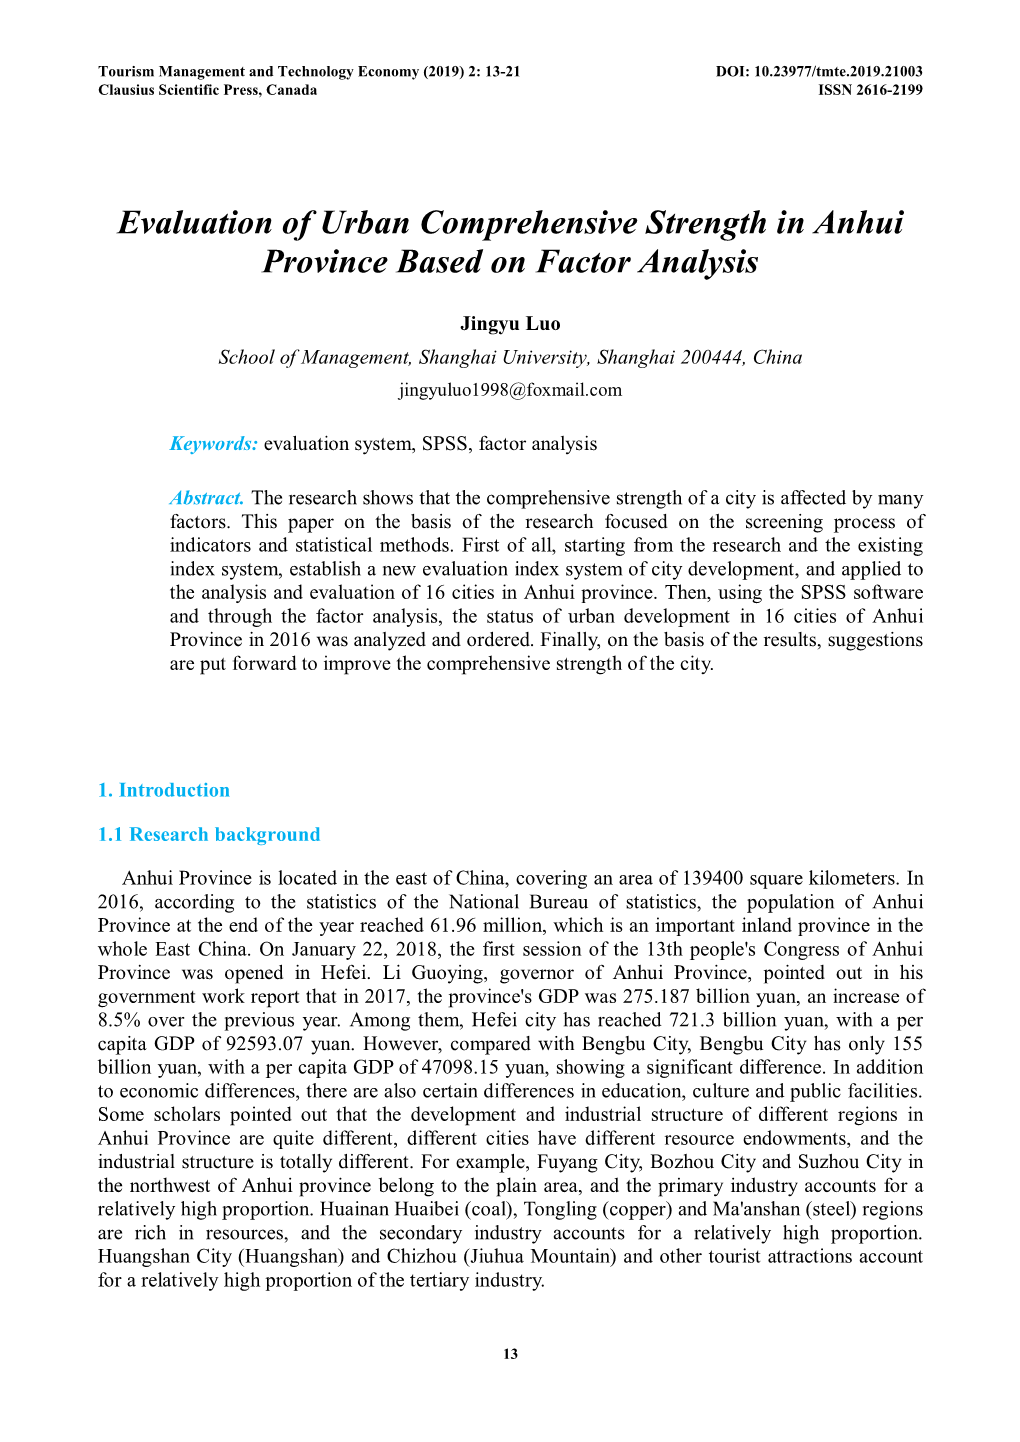 Evaluation of Urban Comprehensive Strength in Anhui Province Based on Factor Analysis